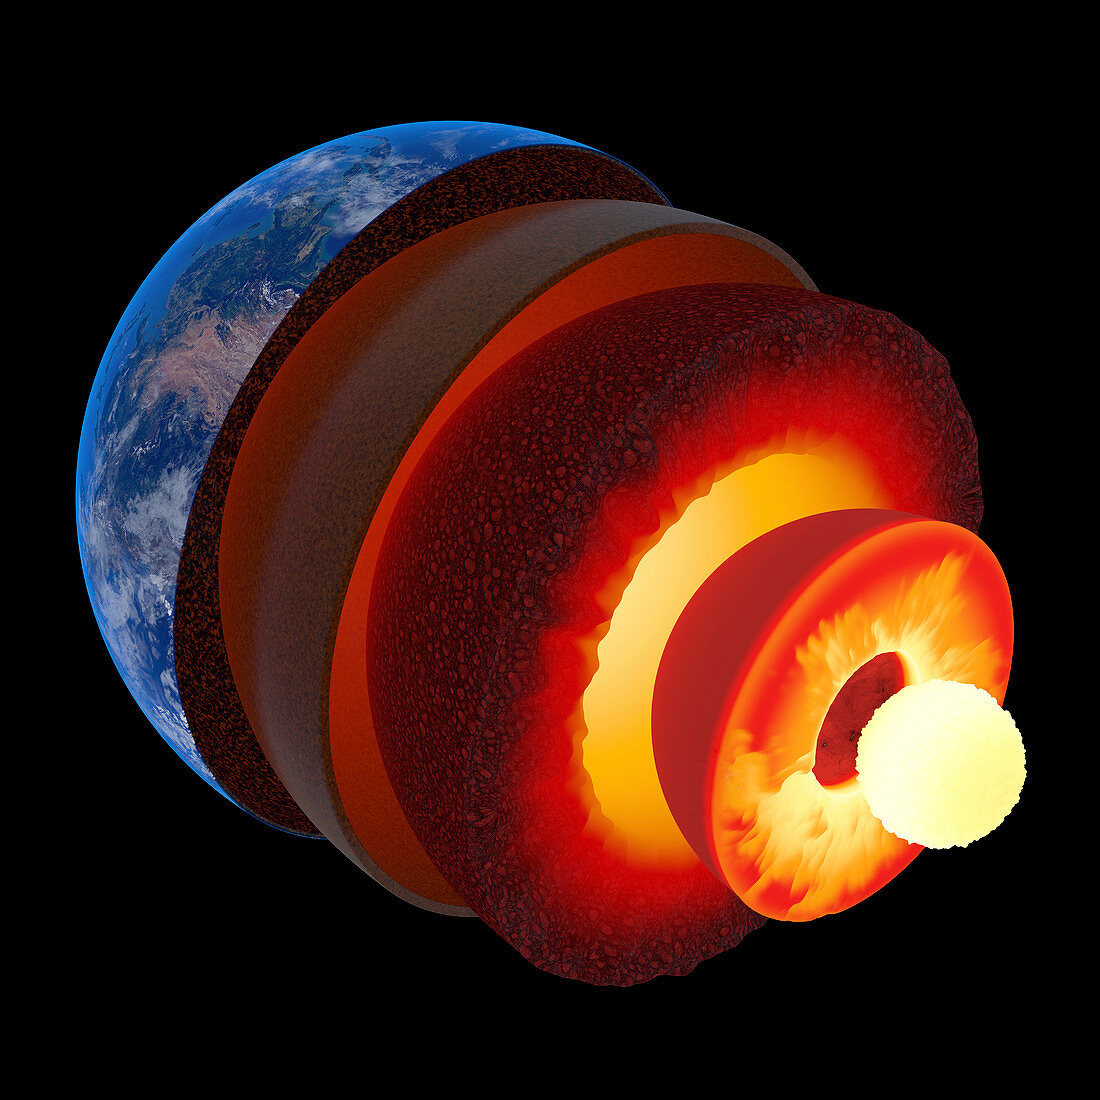 Layers of the earth's core